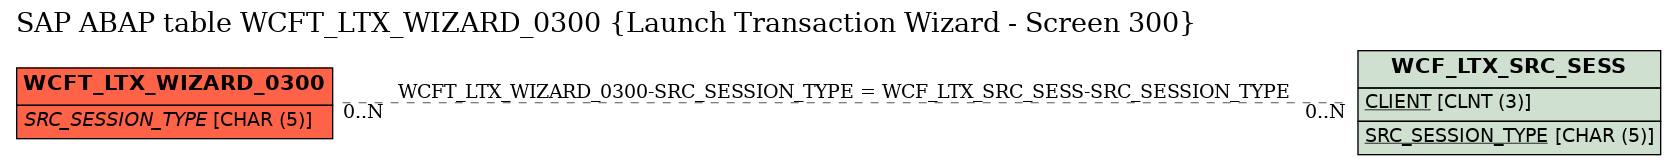 E-R Diagram for table WCFT_LTX_WIZARD_0300 (Launch Transaction Wizard - Screen 300)